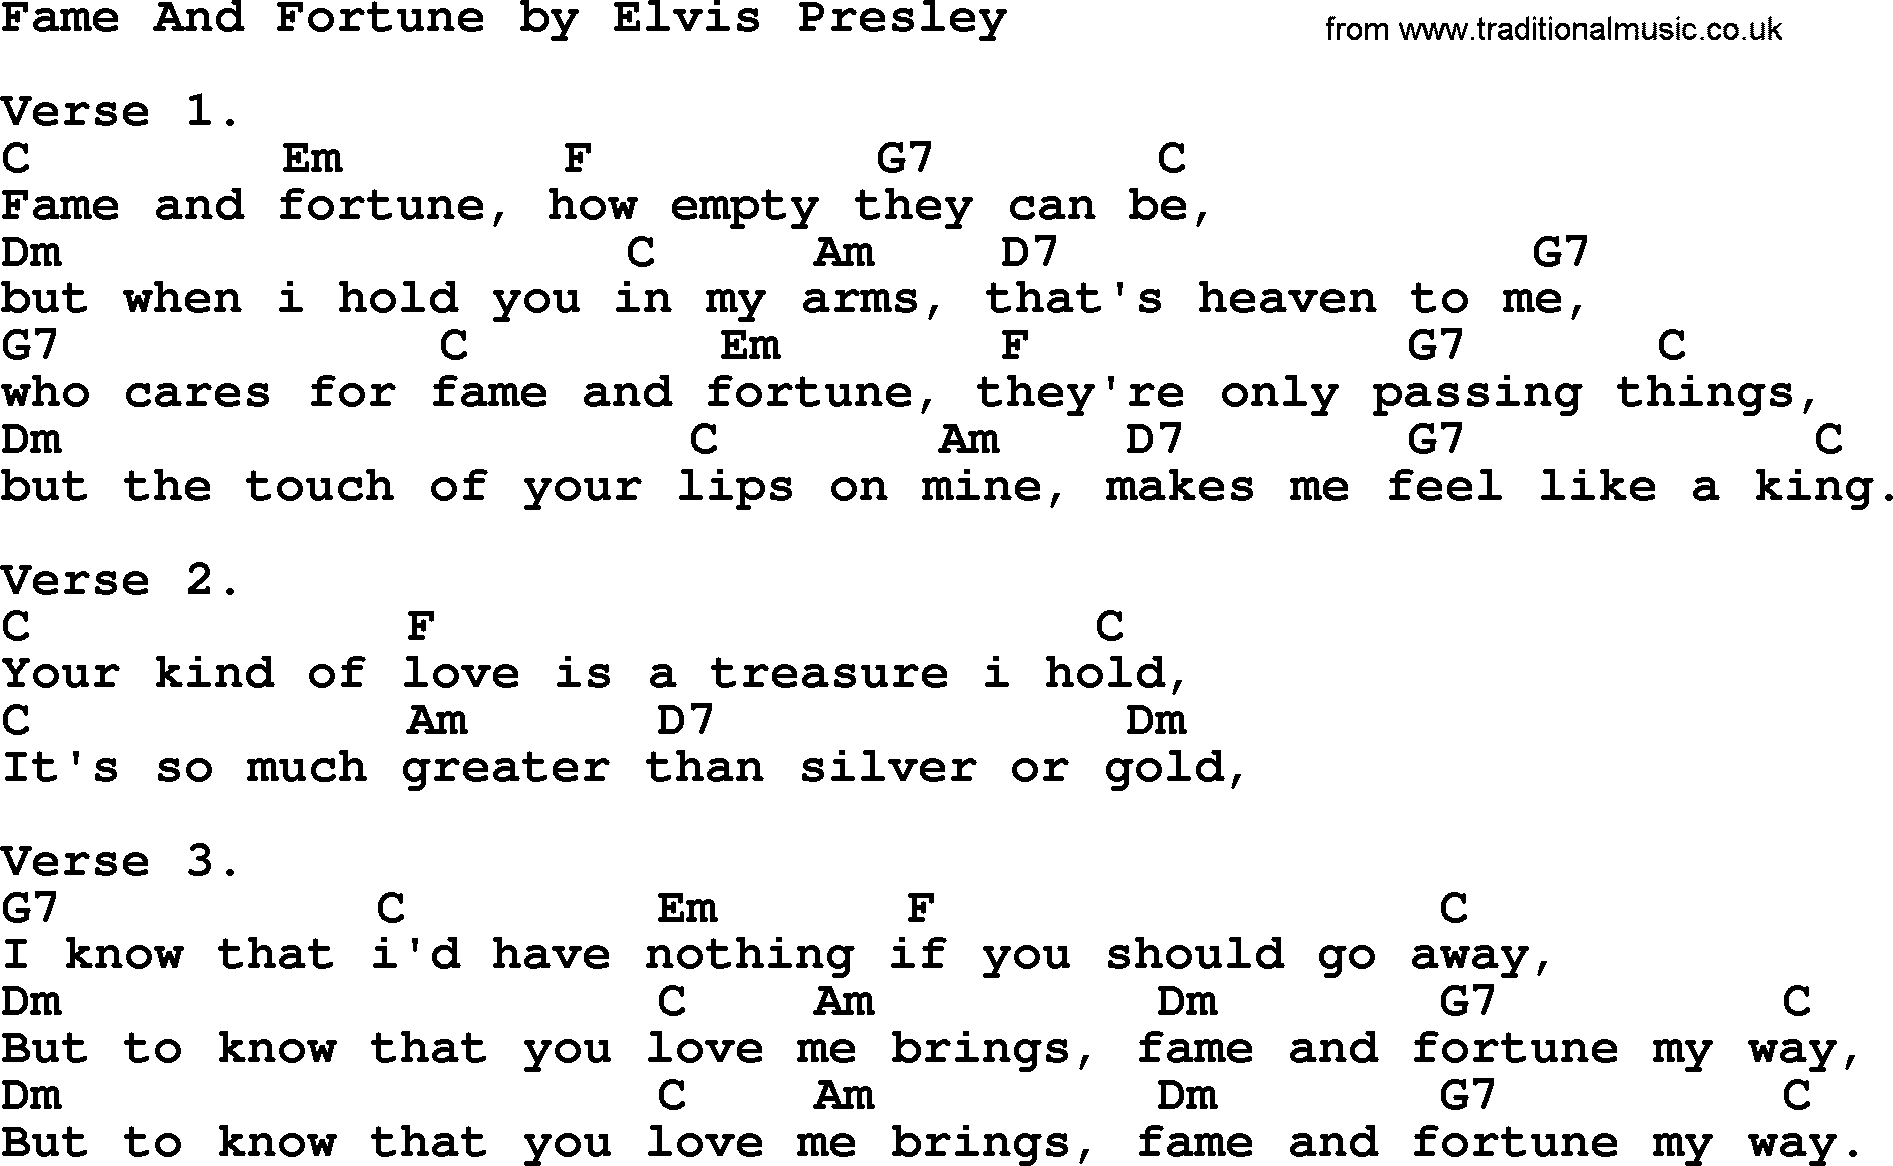 Elvis Presley song: Fame And Fortune, lyrics and chords